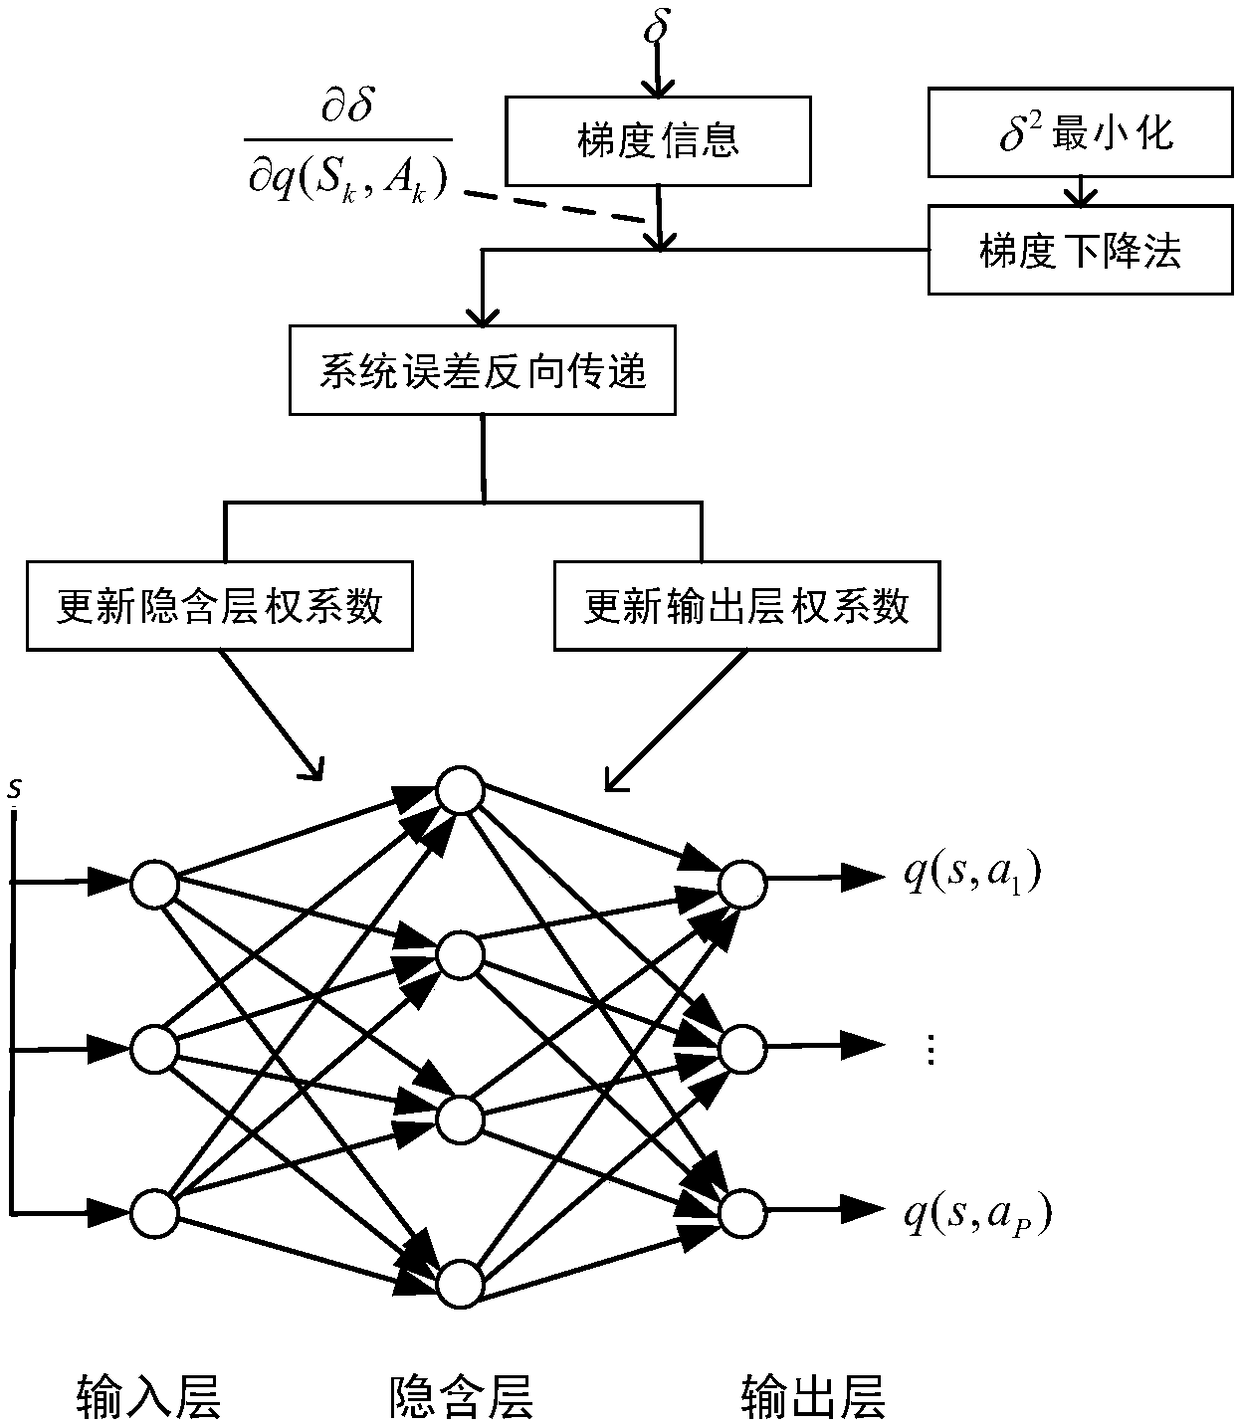 Method for learning non-player character combat strategies on basis of deep Q-learning networks